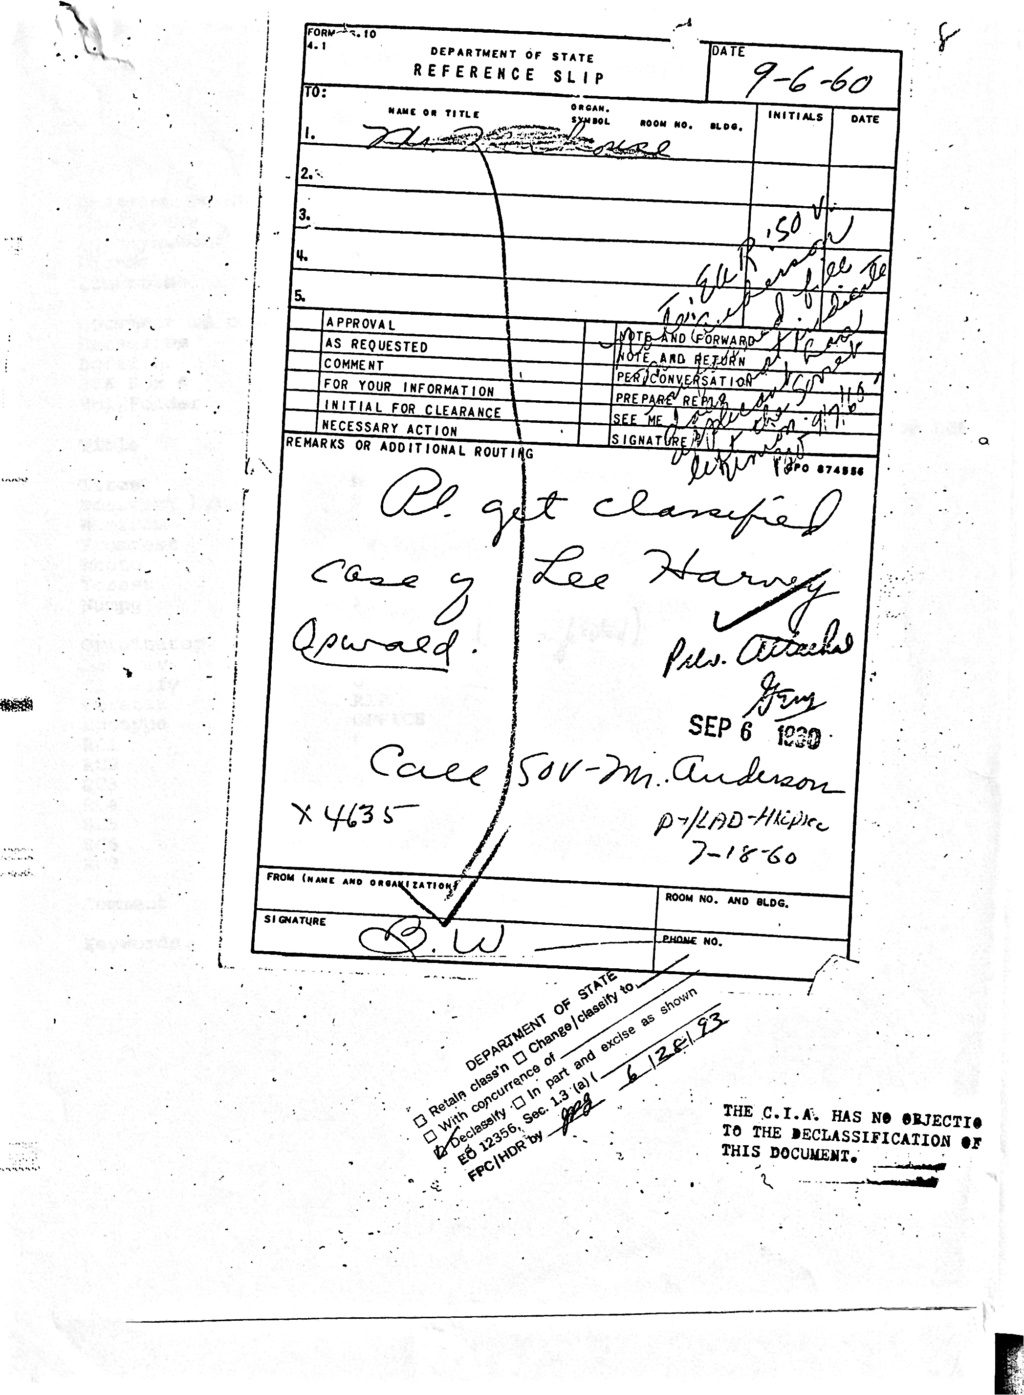 The State Department's Interest in Oswald in 1960 6f33fc10